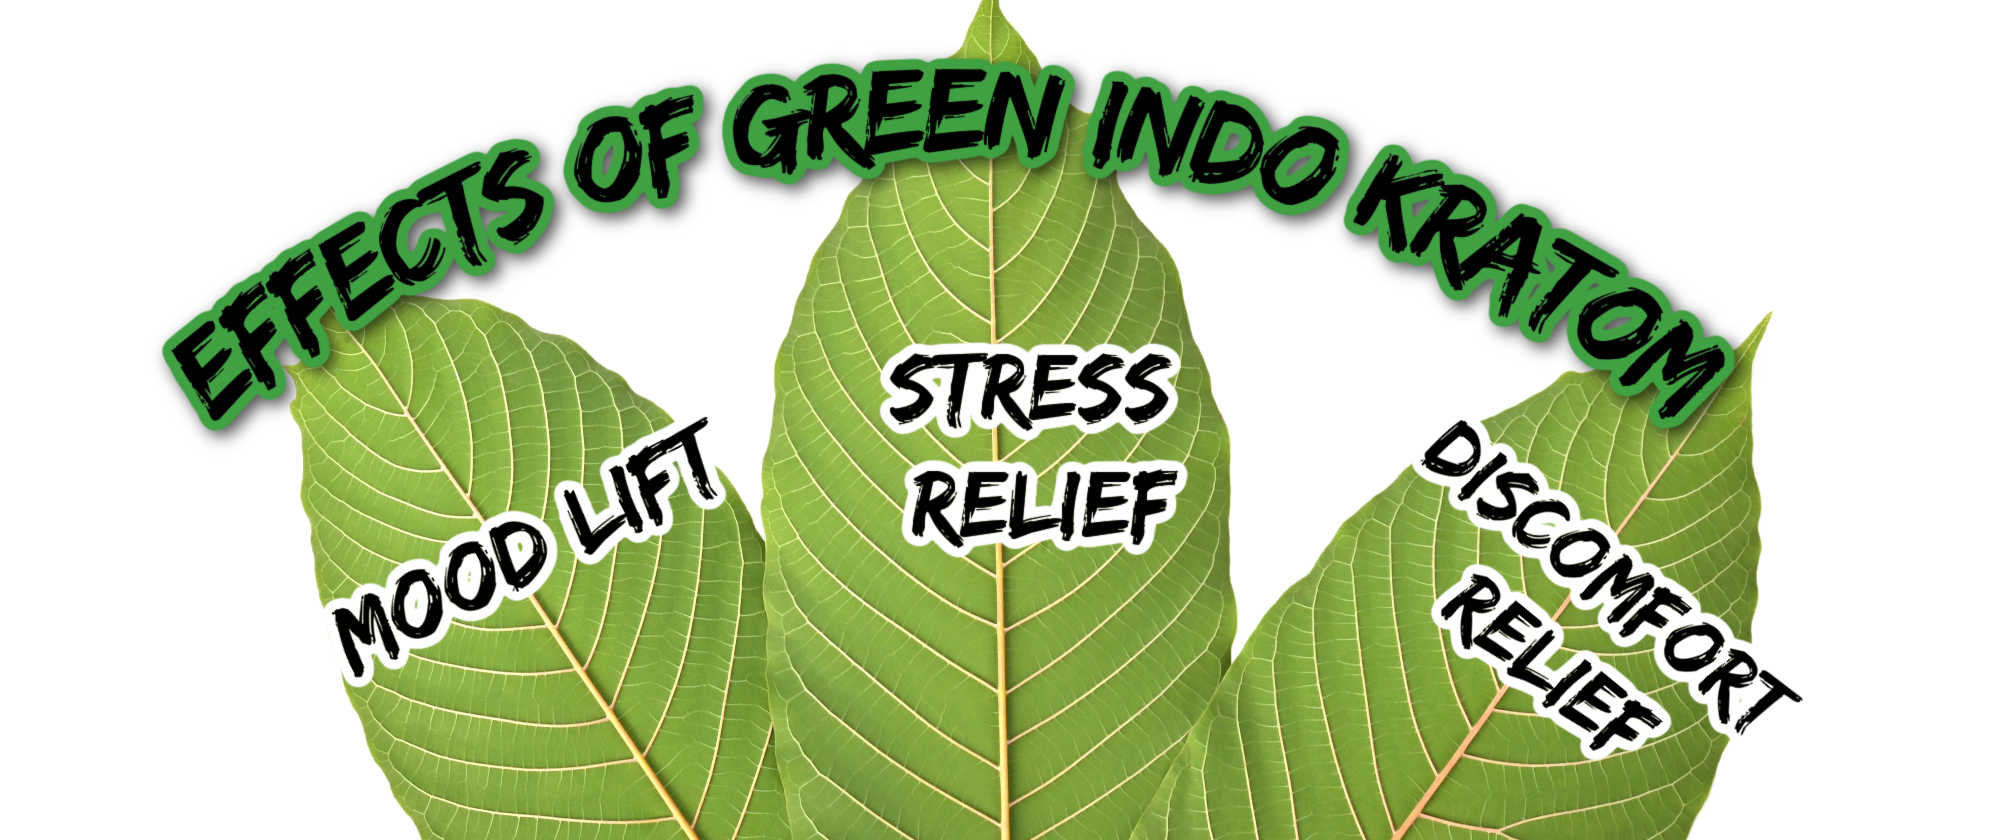 image of green indo kratom effects